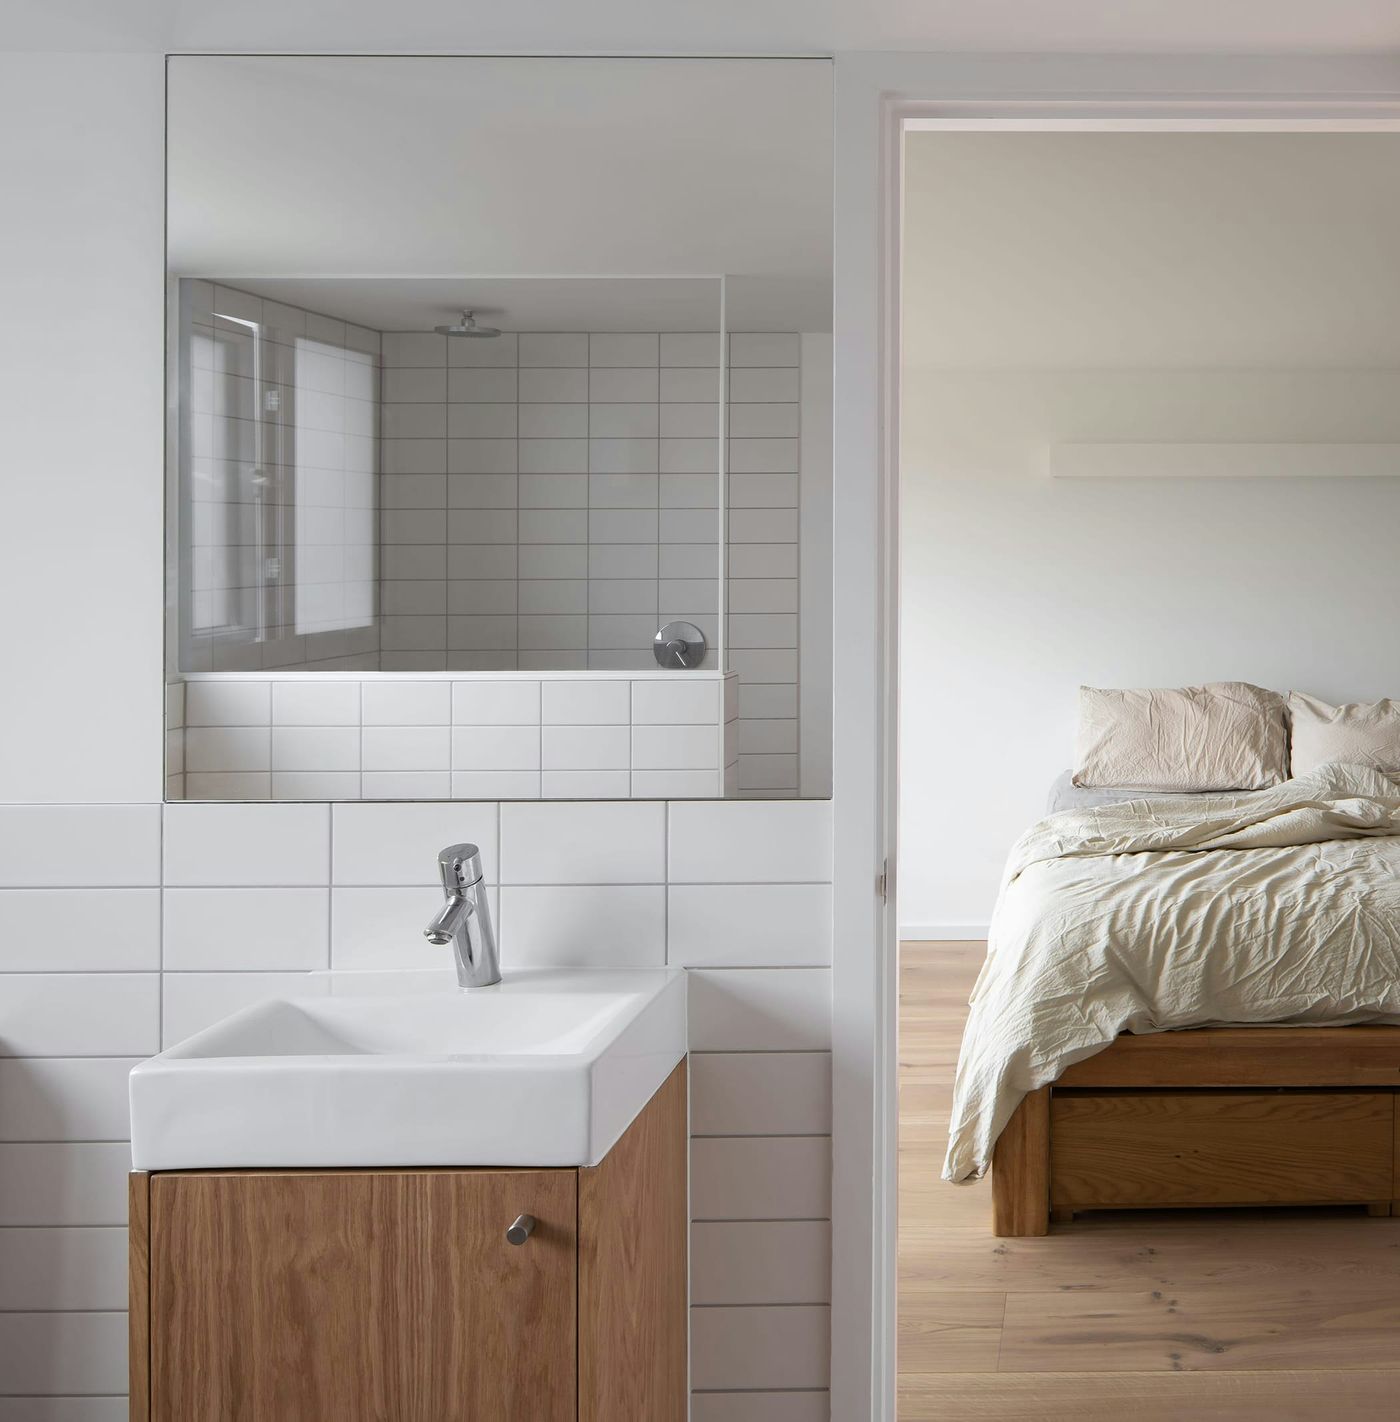 Ensuite bathroom and master bedroom suite within From Works loft conversion and rear dormer extension in Blackheath, London.